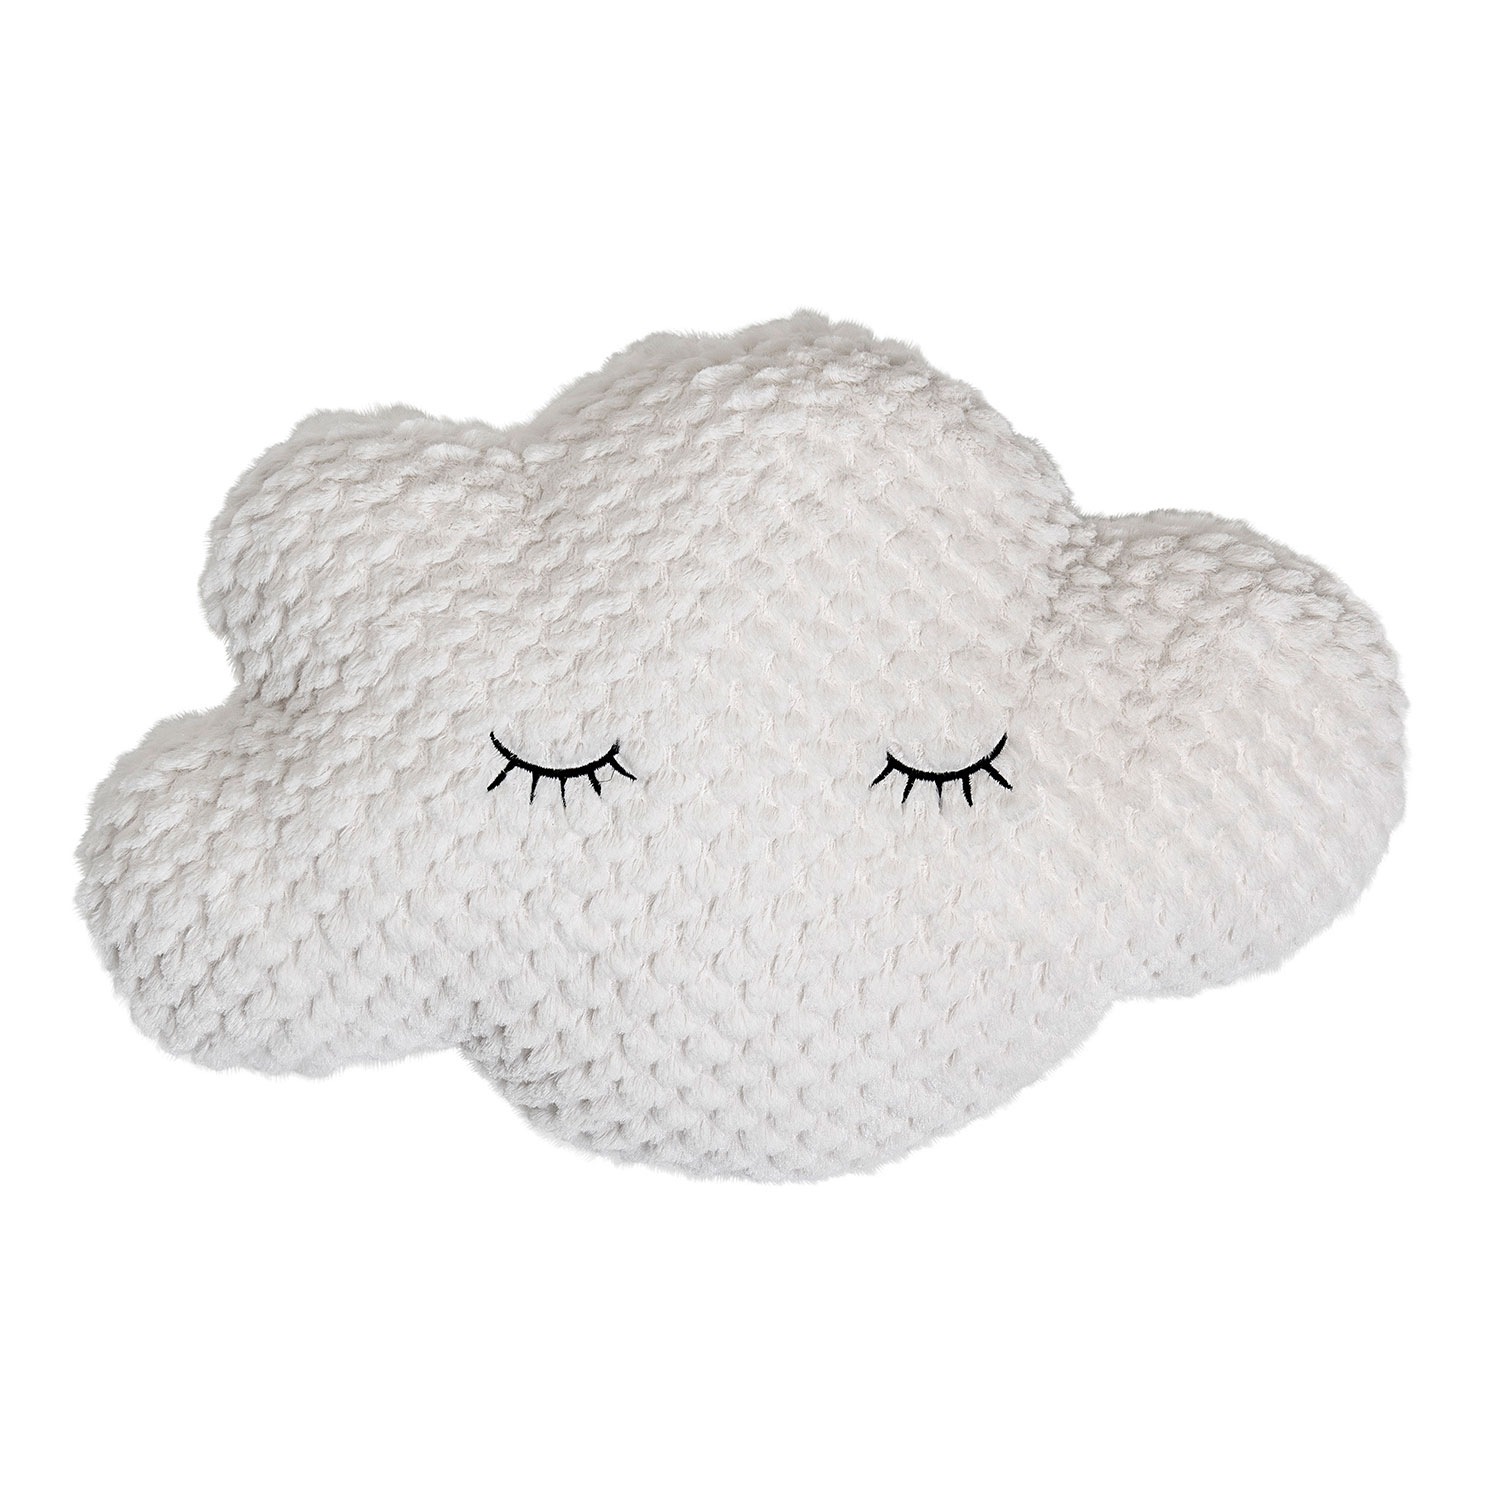 THERALINE Almohada infantil Cloud White Bamboo Collection